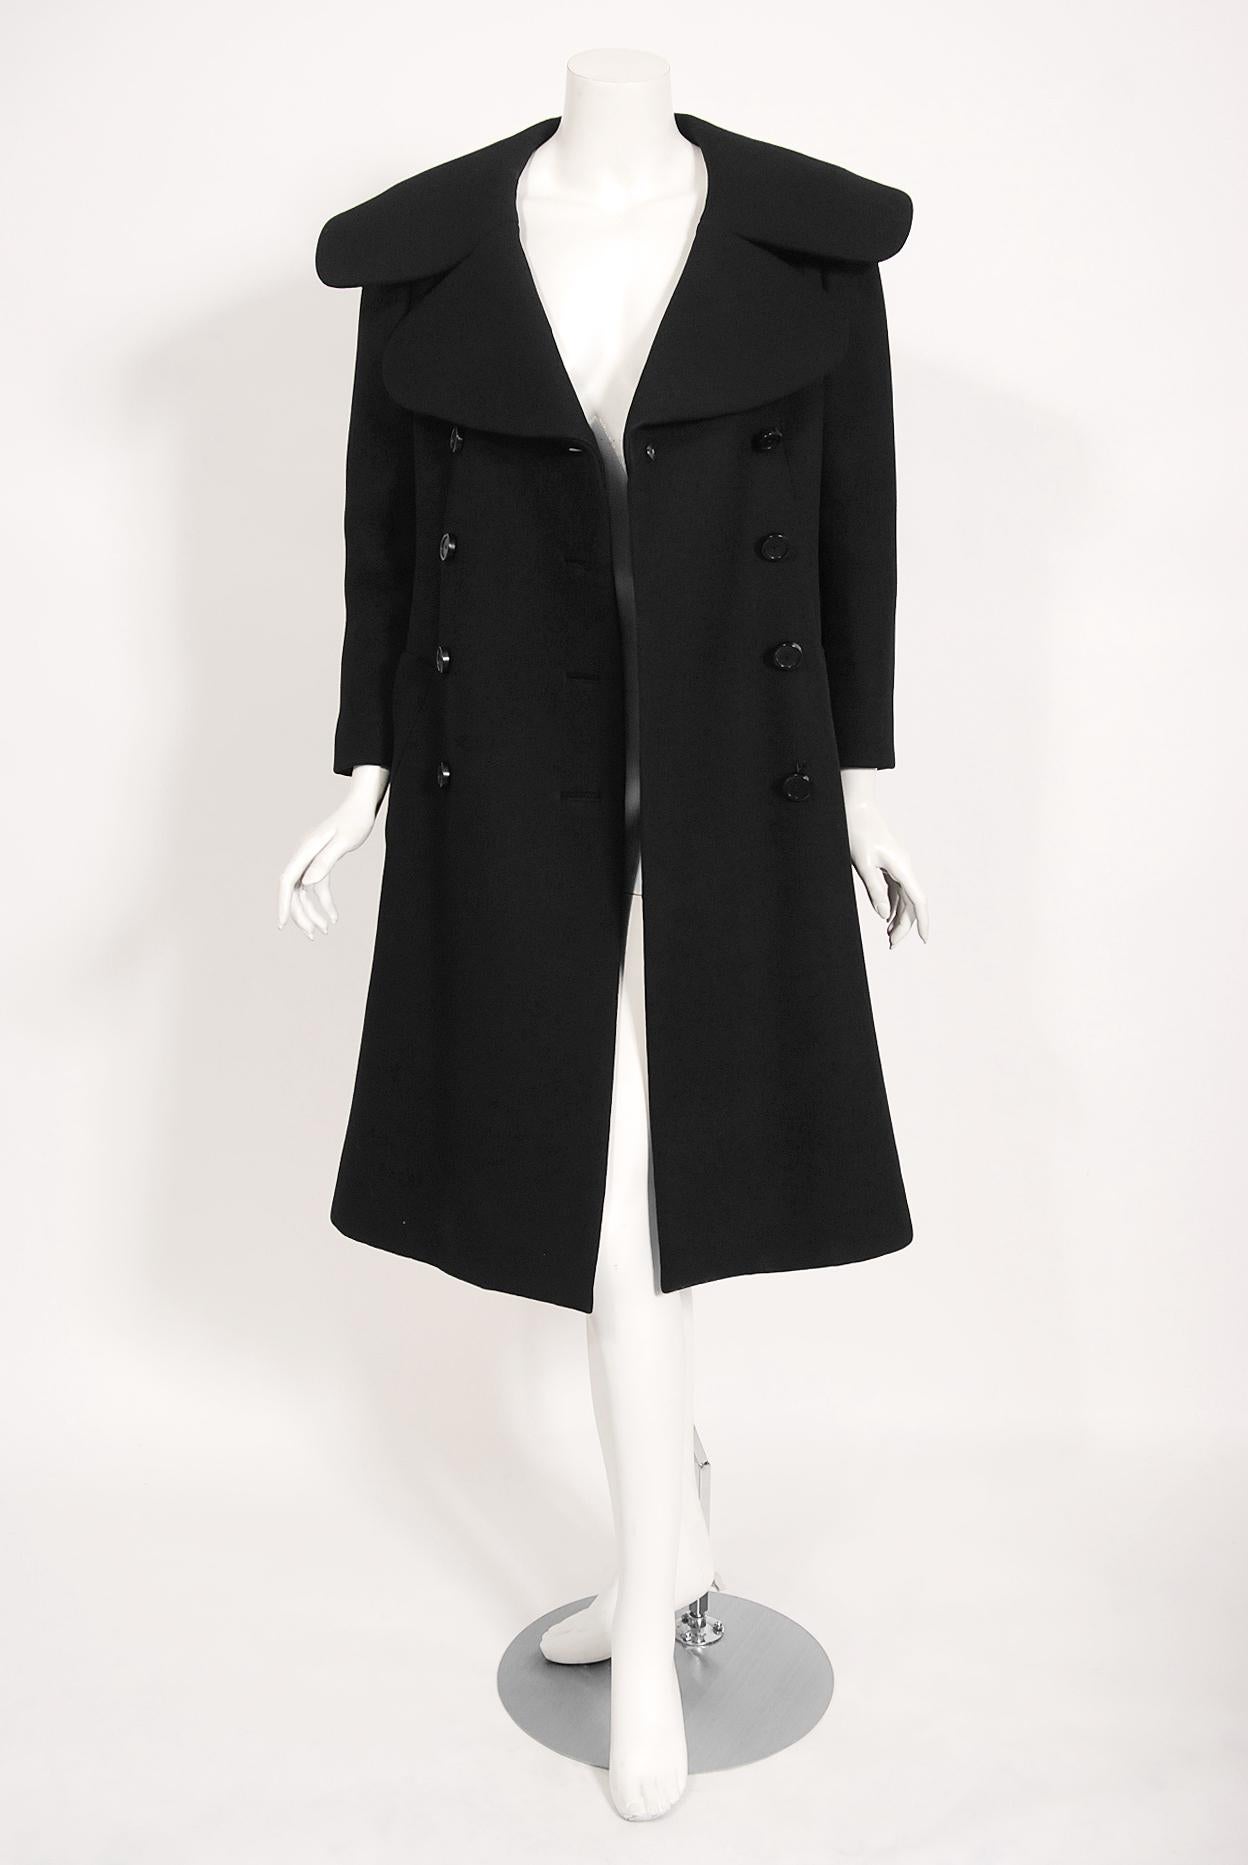 Vintage 1968 Norman Norell Black Wool Over-Sized Collar Double Breasted Mod Coat 4